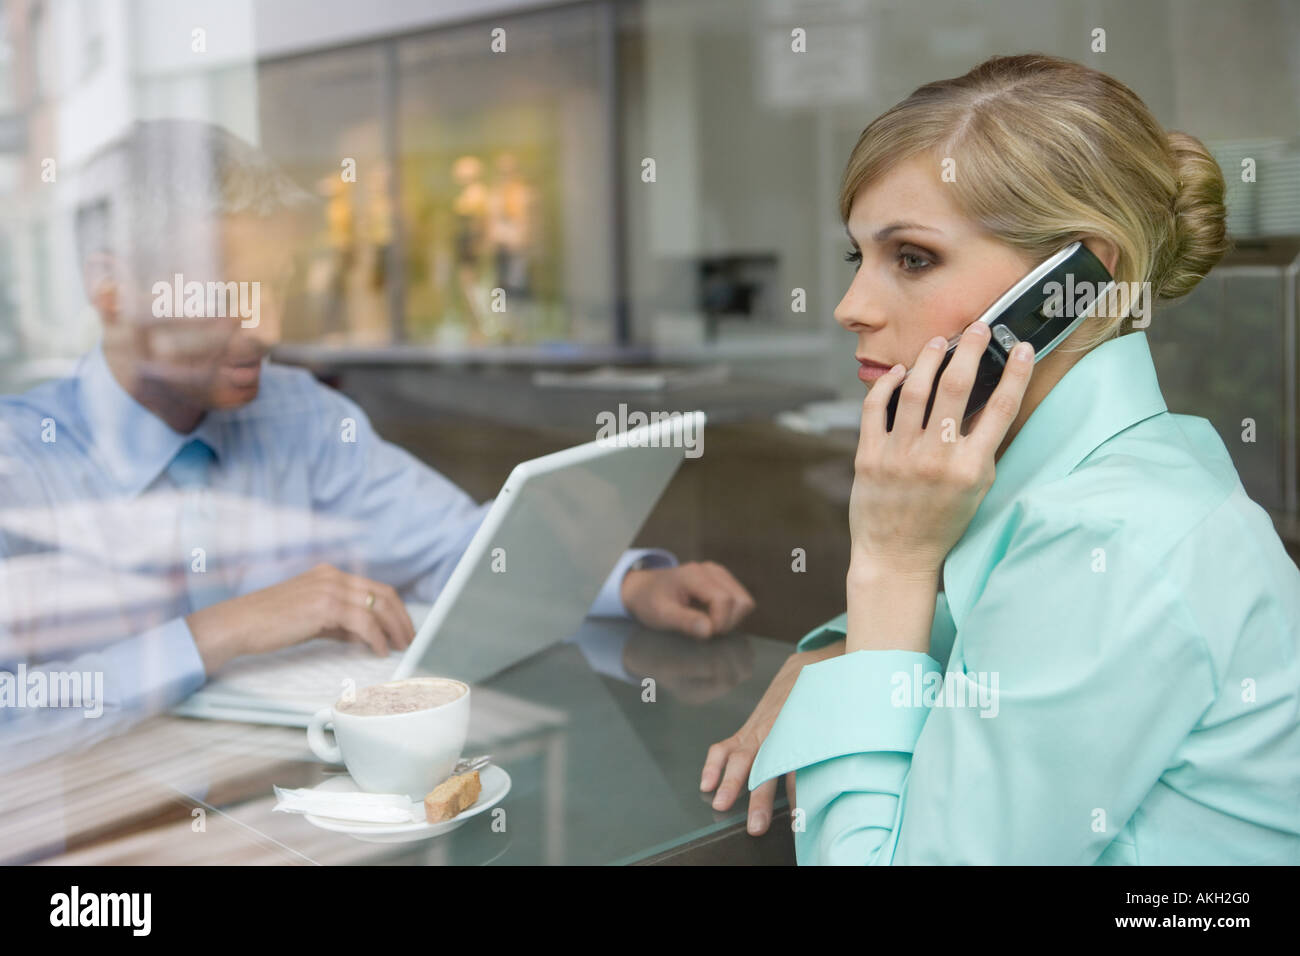 Business couple working at bar table, view through window Stock Photo